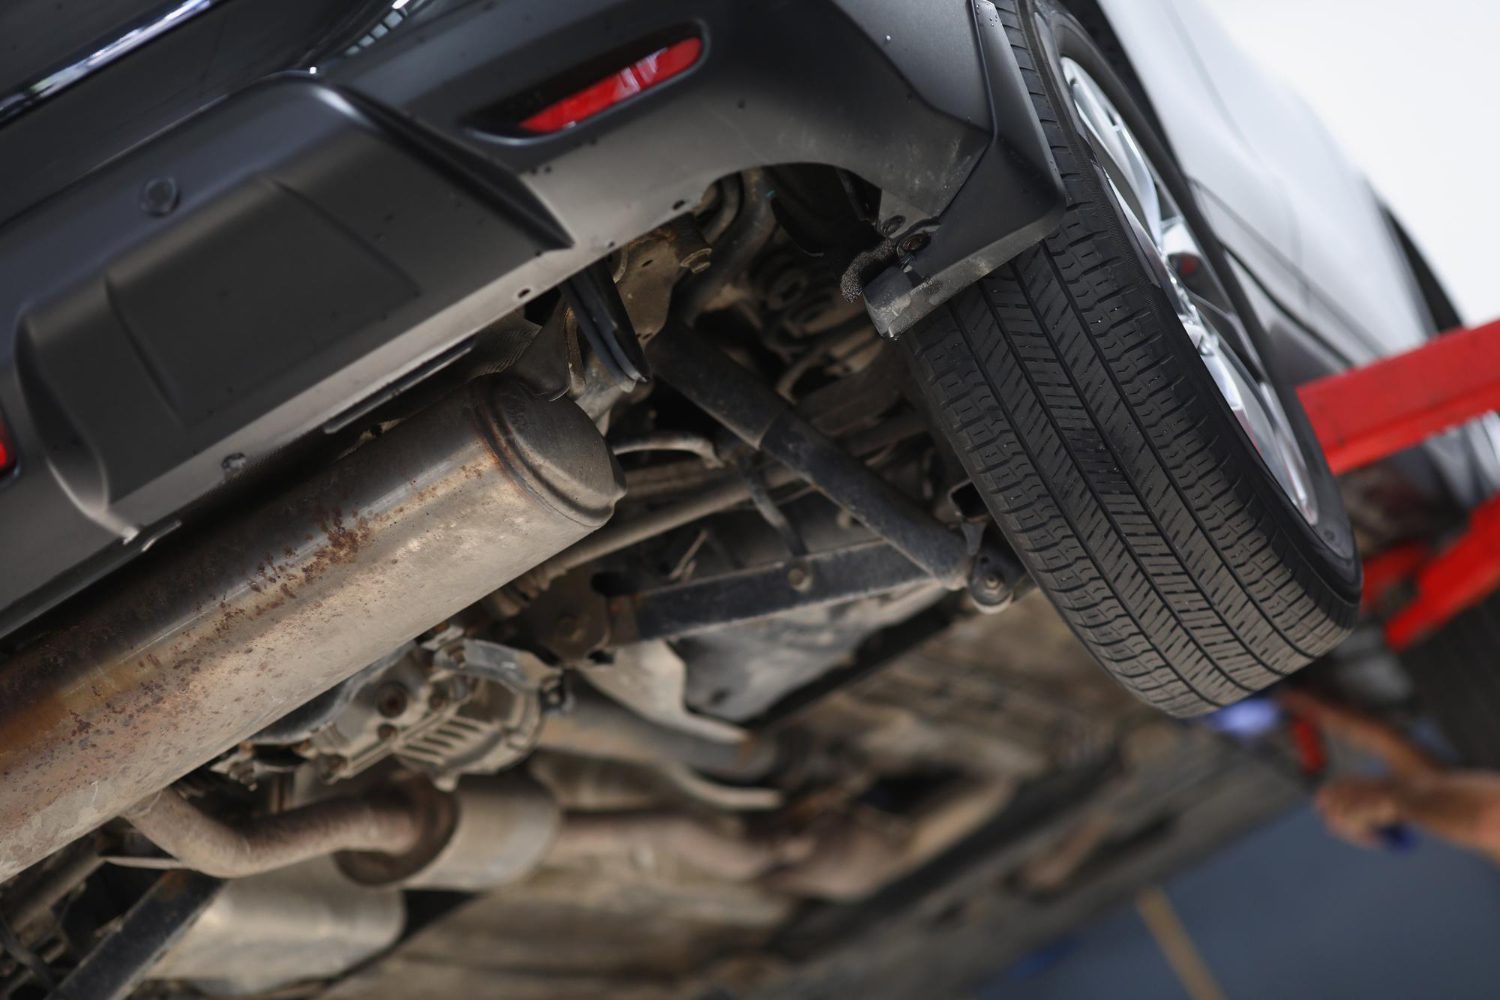 car-lifted-maintenance-service-checkup-undercarriage-automobile-bottom-view